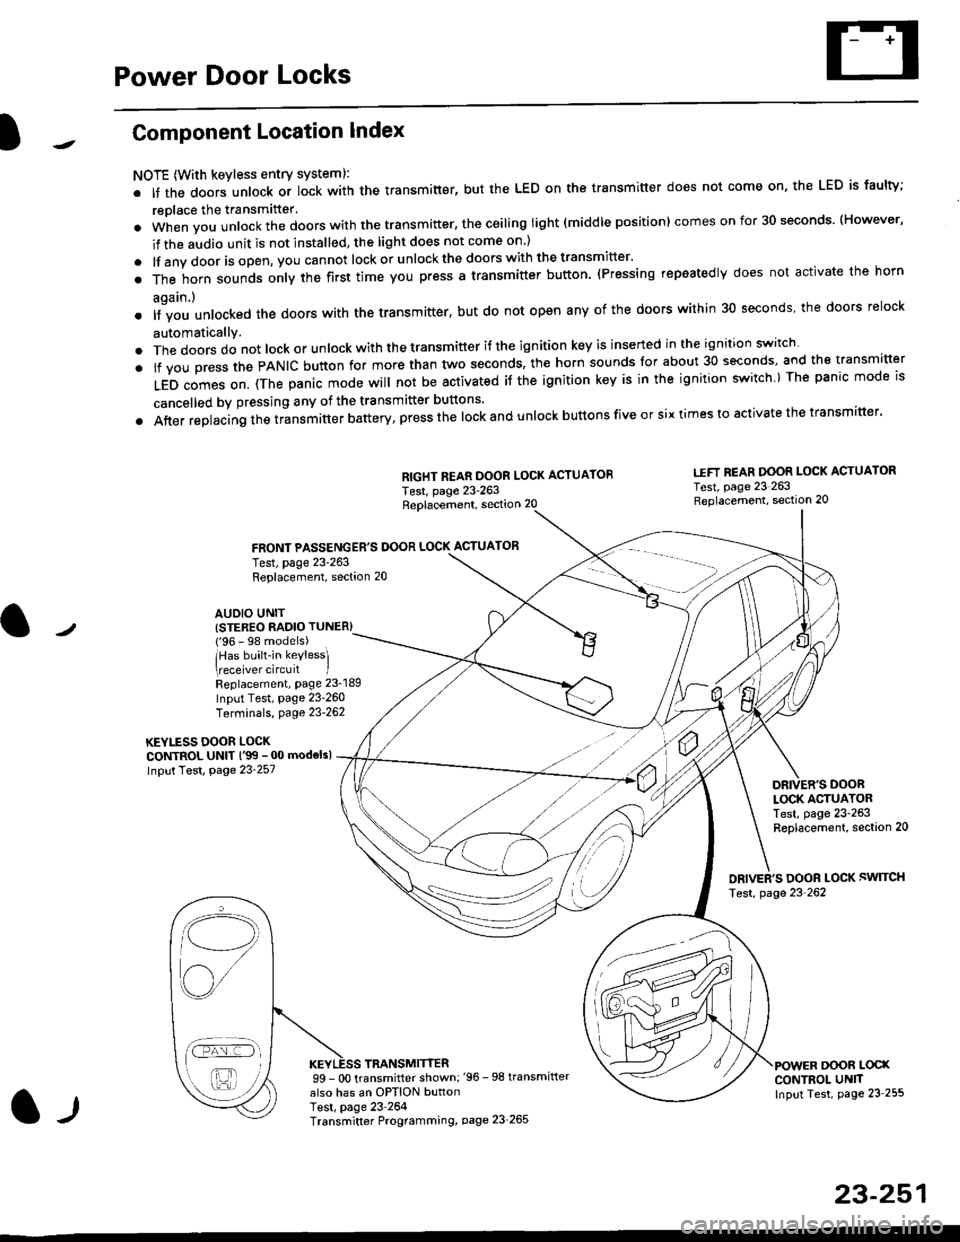 HONDA CIVIC 1999 6.G Workshop Manual Power Door Locks
Component Location Index
NOTE (With keyless entry systeml:
. It the doors unlock or lock with the transmitter, but the LED on the transmitter does not come on, the LED is faulty;
repl